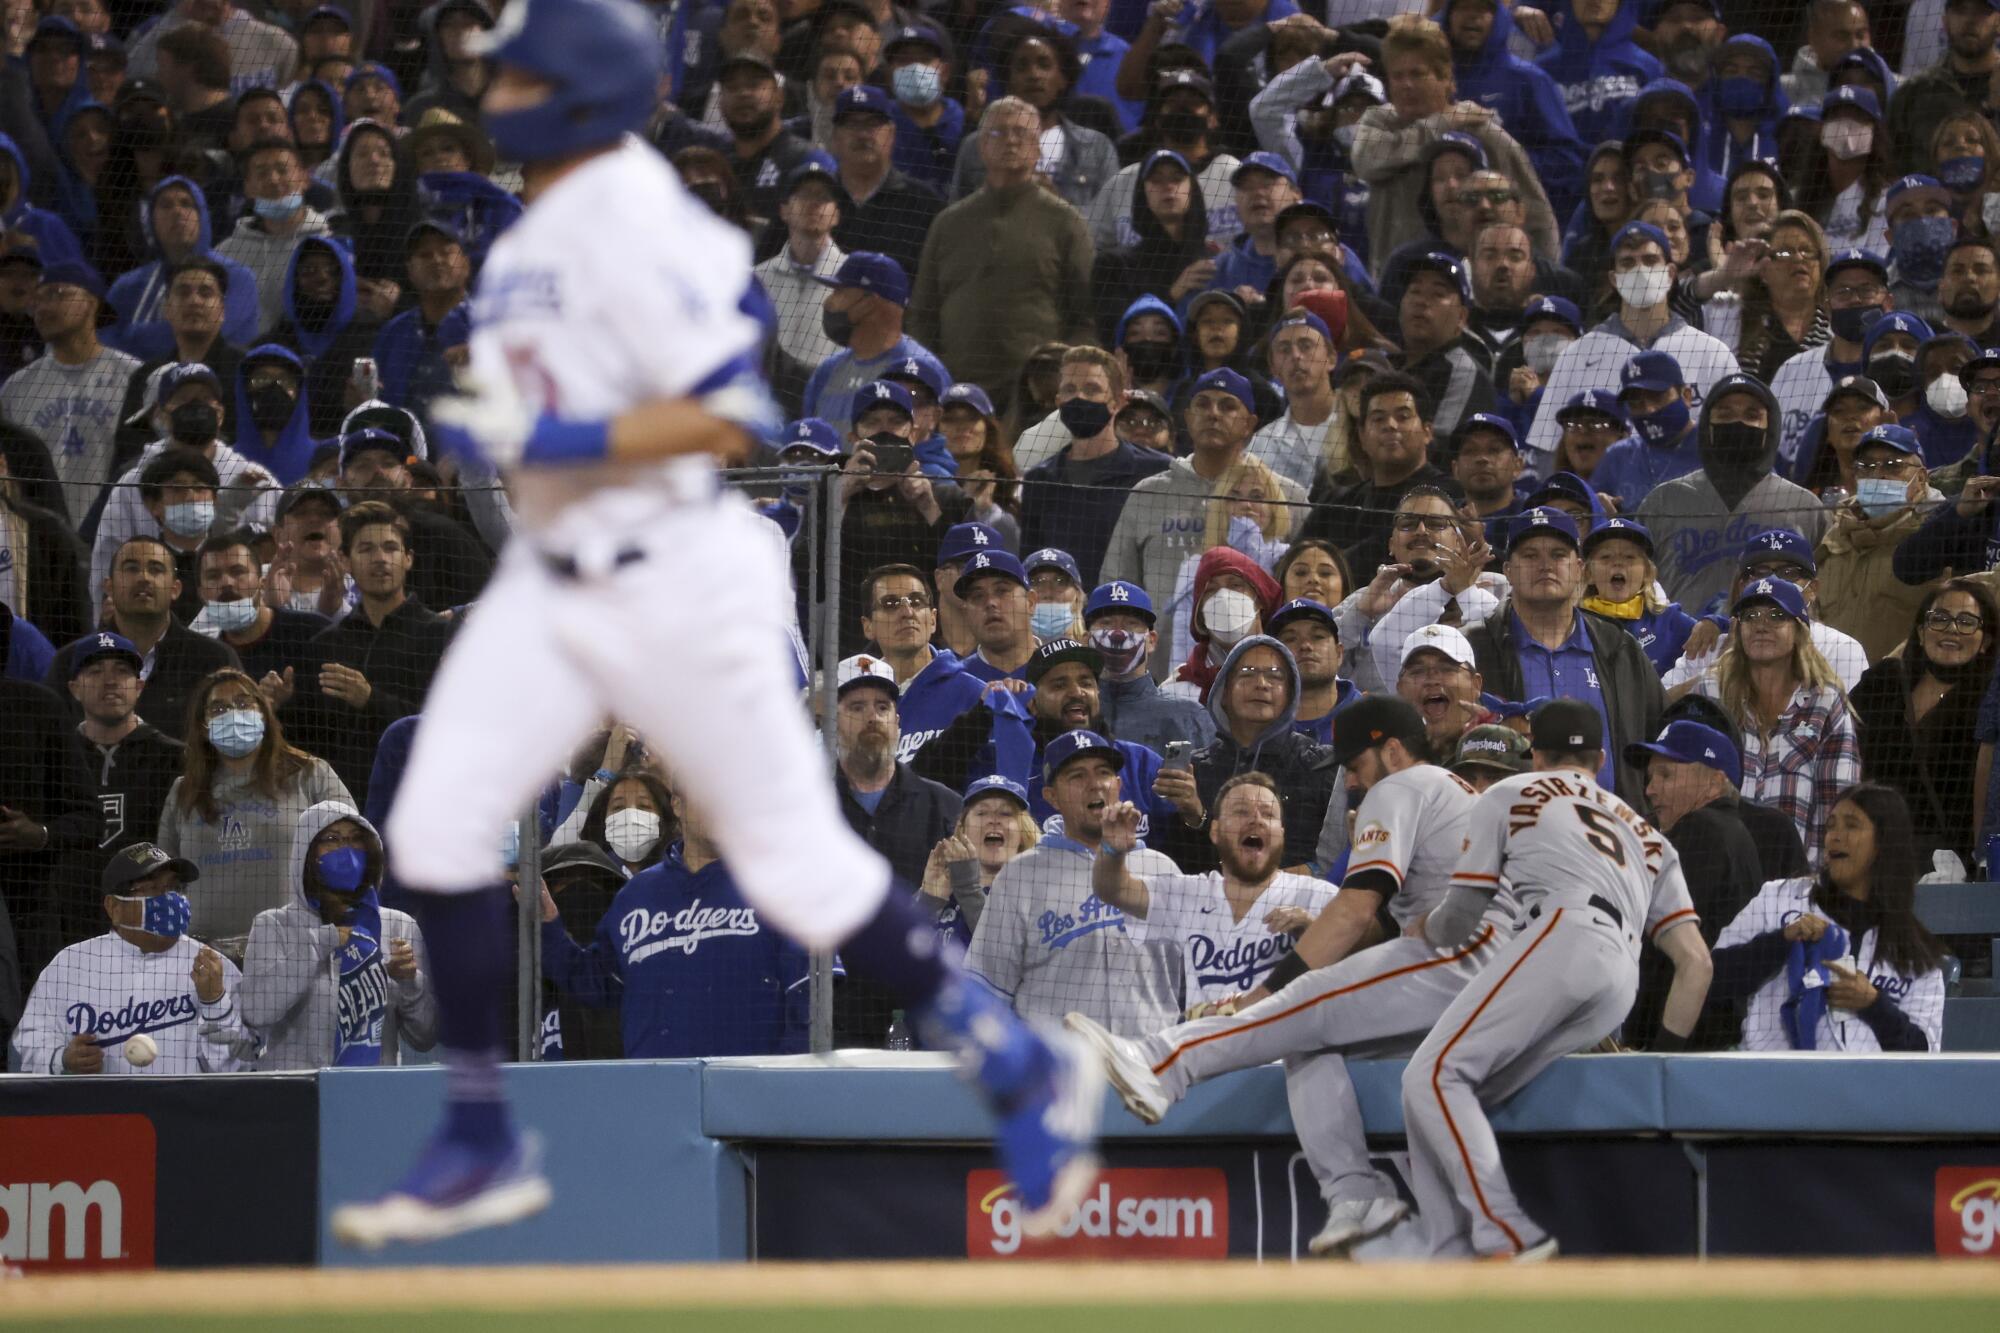 San Francisco Giants first baseman Kris Bryant, center, and Mike Yastrzemski, right, are unable to track down a foul ball hit